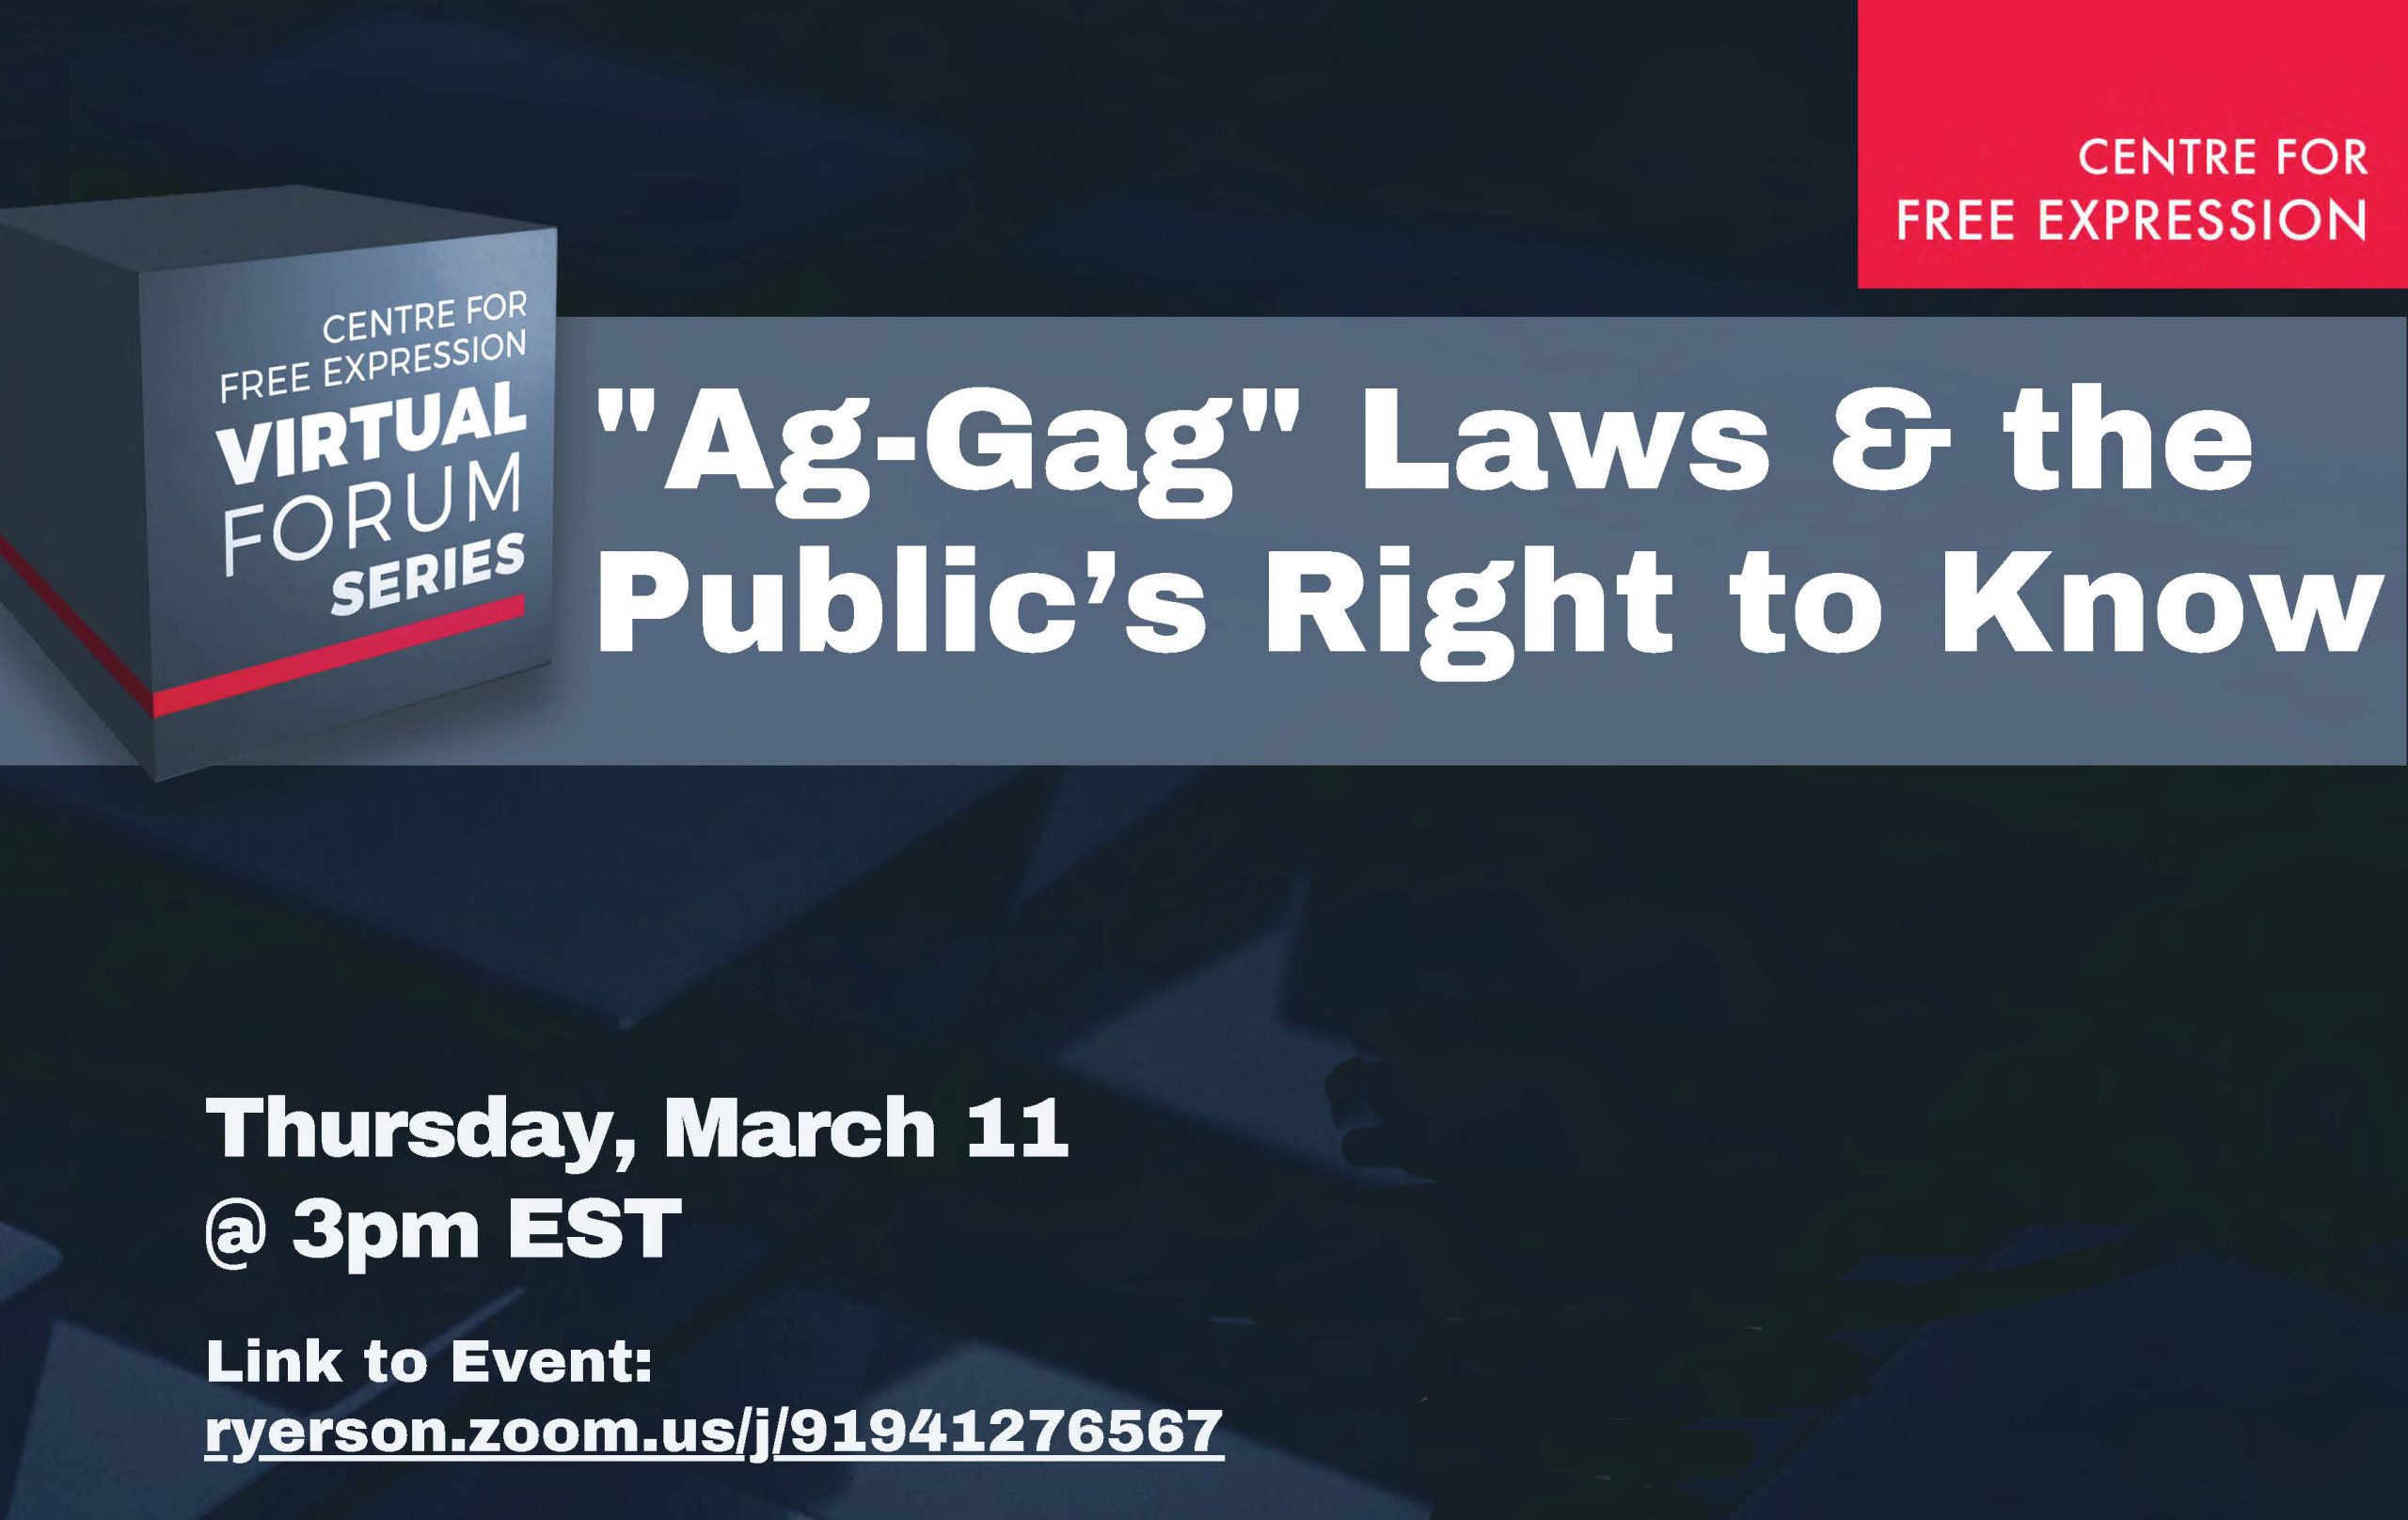 Ag-Gag Laws & the Public’s Right to Know | CFE Virtual Forum Series